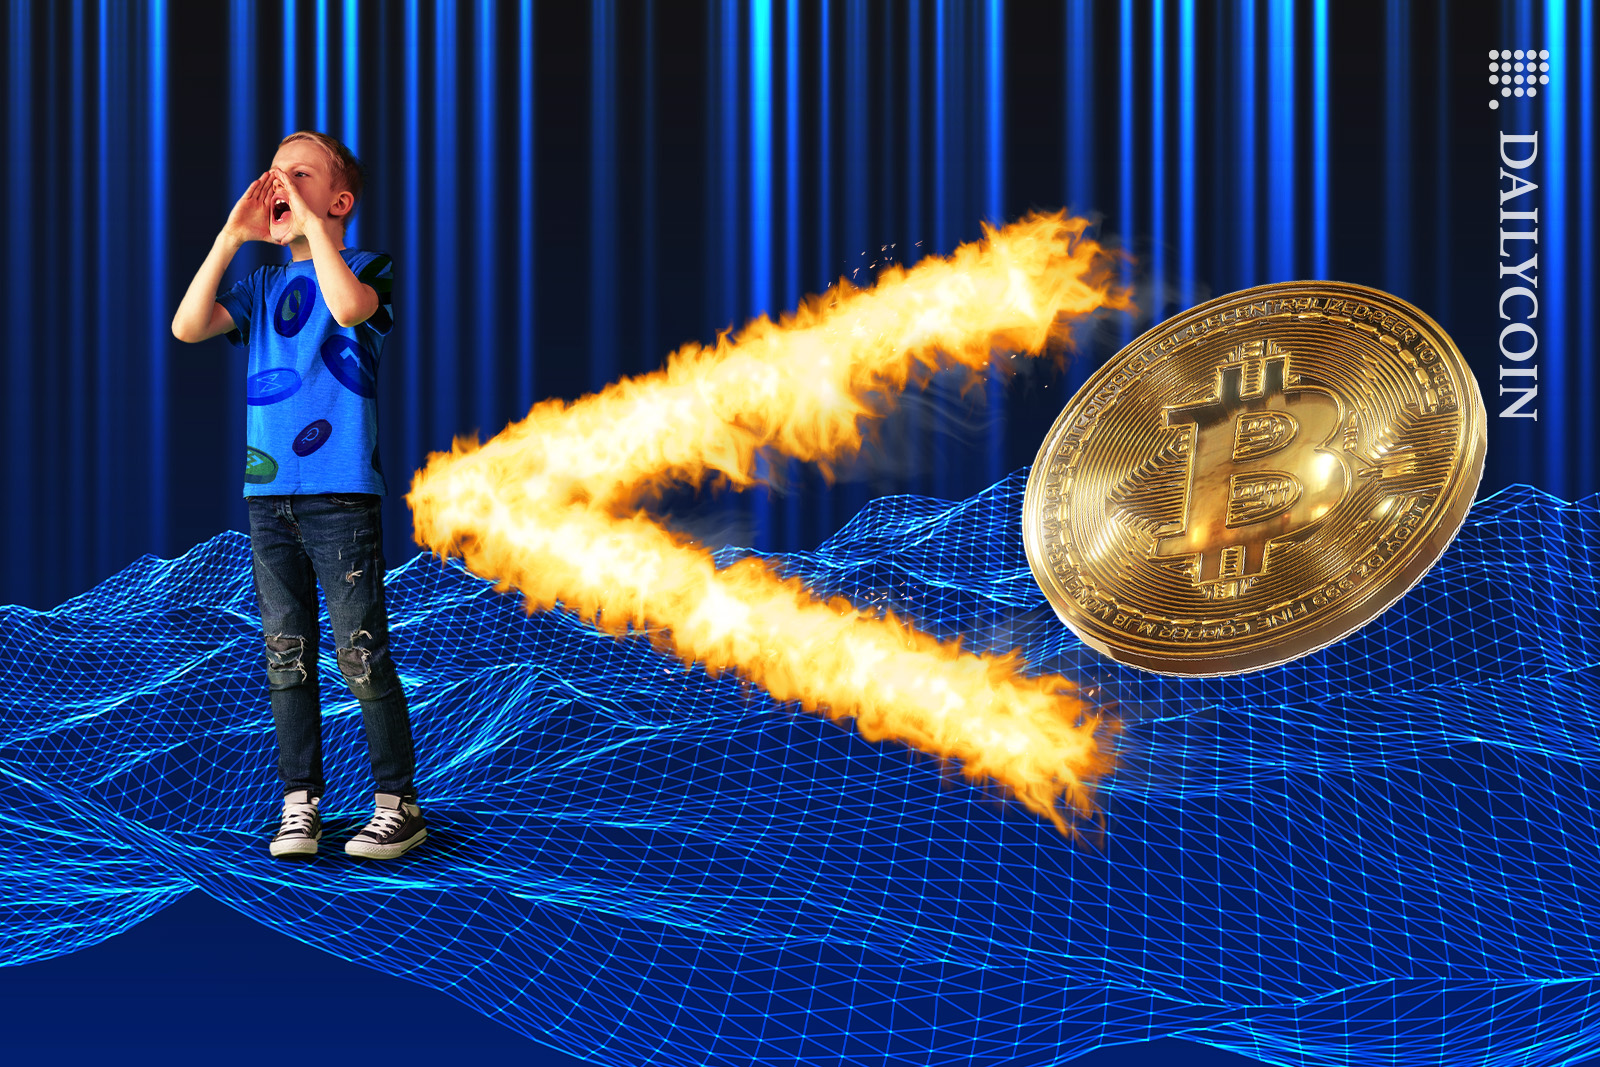 Boy shouting that Bitcoin is greater than the rest of the coins.